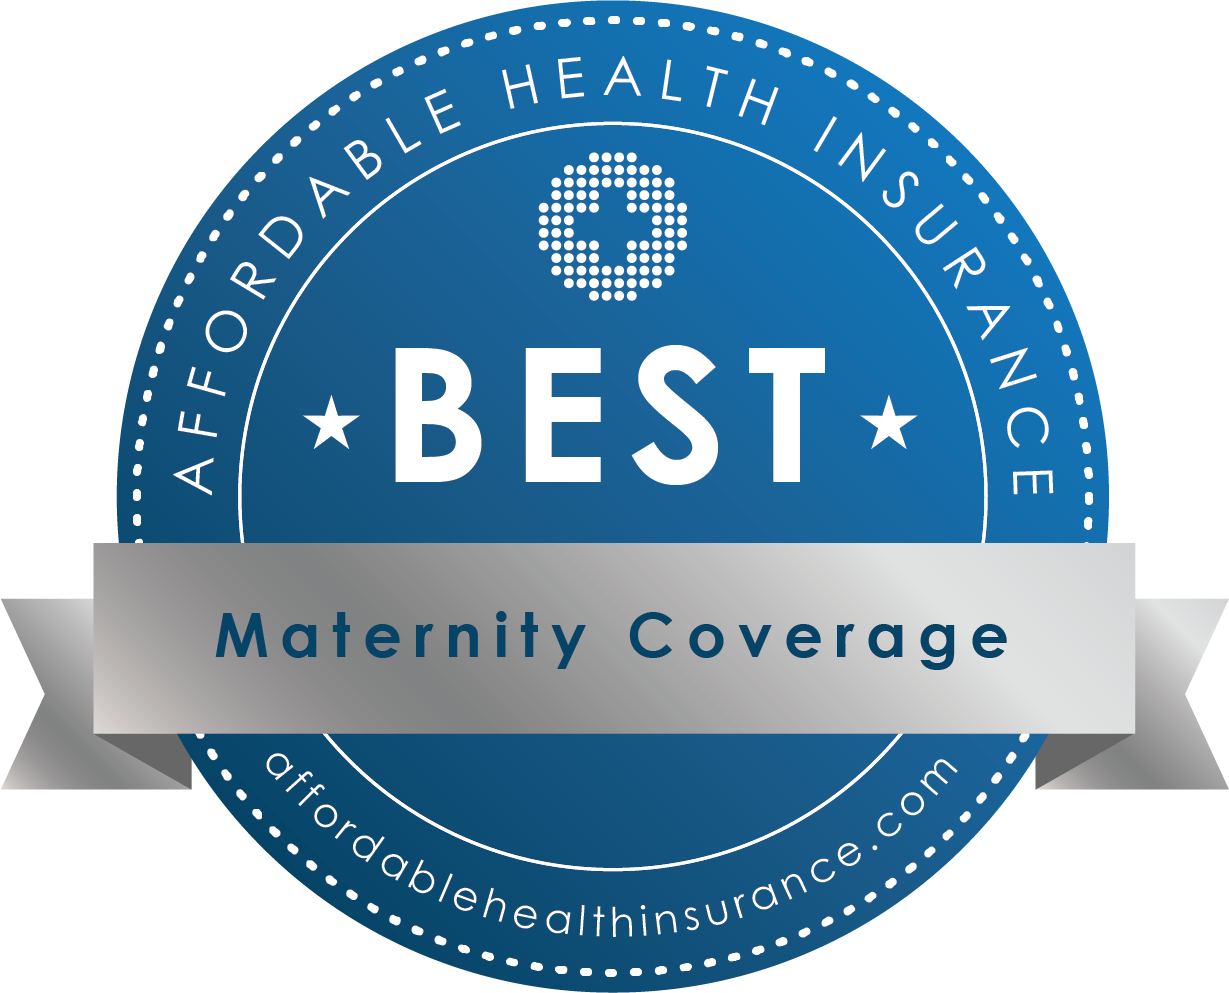 Pregnancy Insurance Policy: Which Insurance is Best for Maternity?